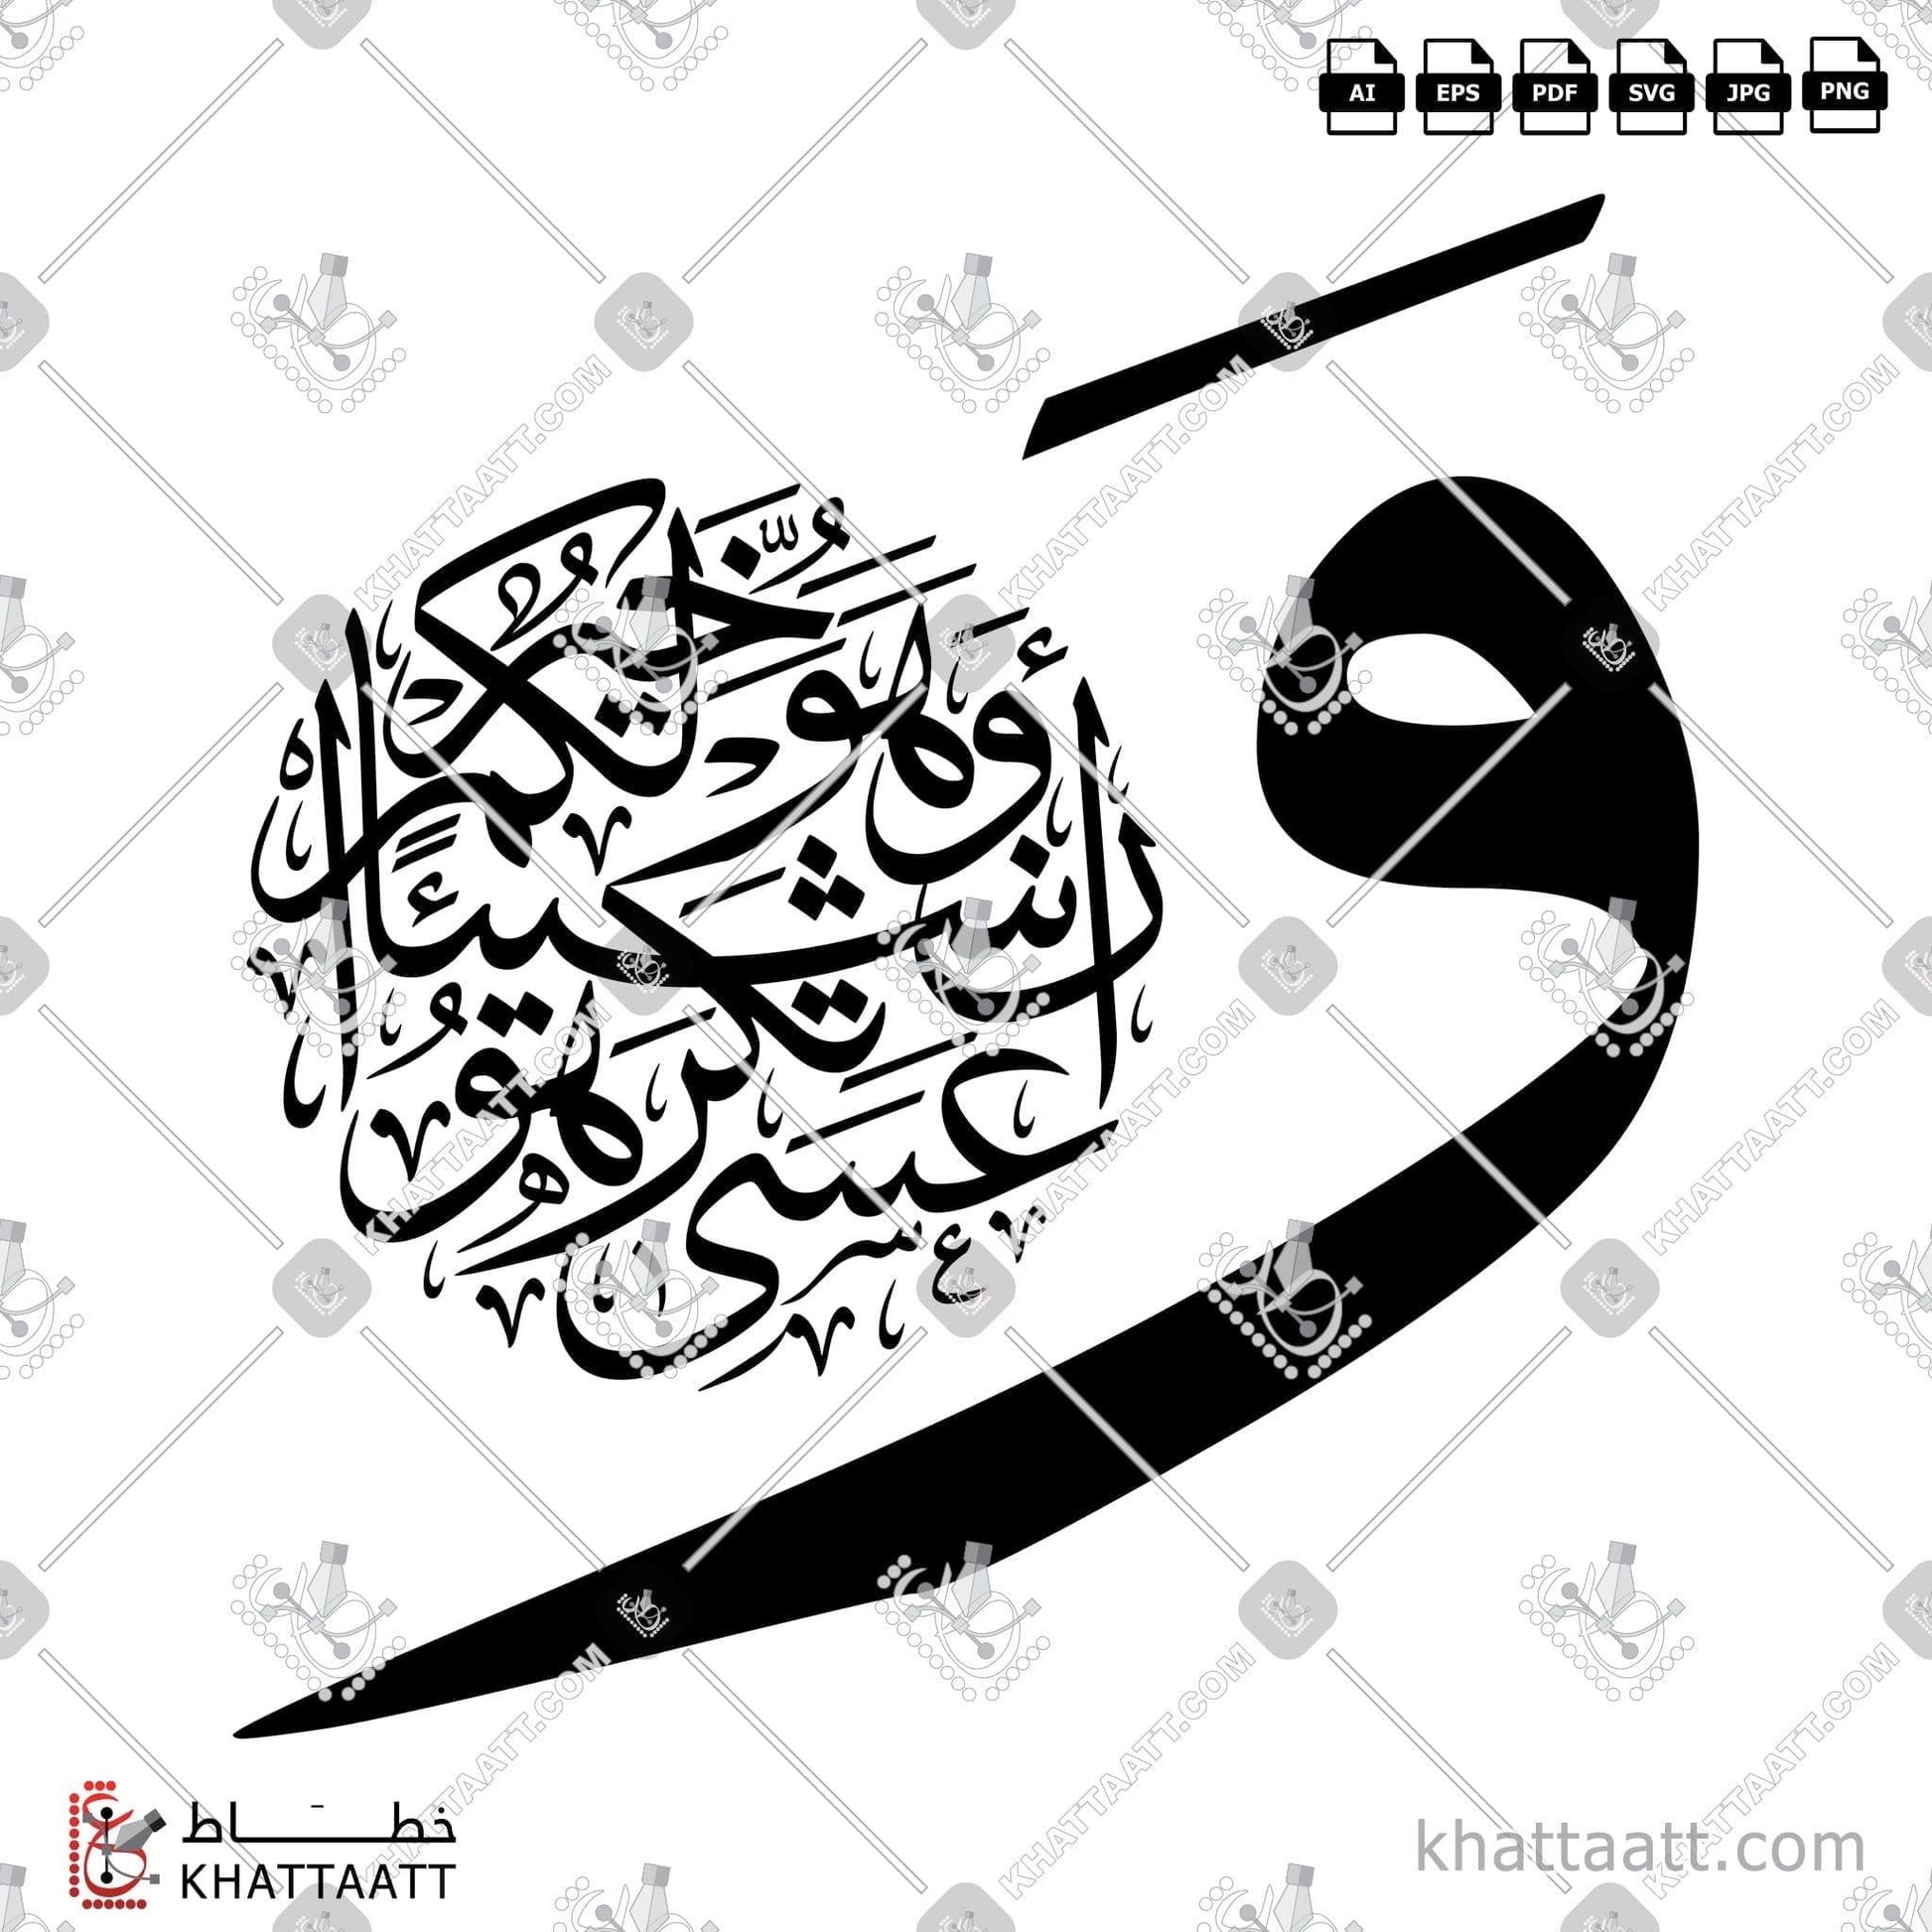 Download Arabic Calligraphy of وعسى أن تكرهوا شيئا وهو خير لكم in Thuluth - خط الثلث in vector and .png